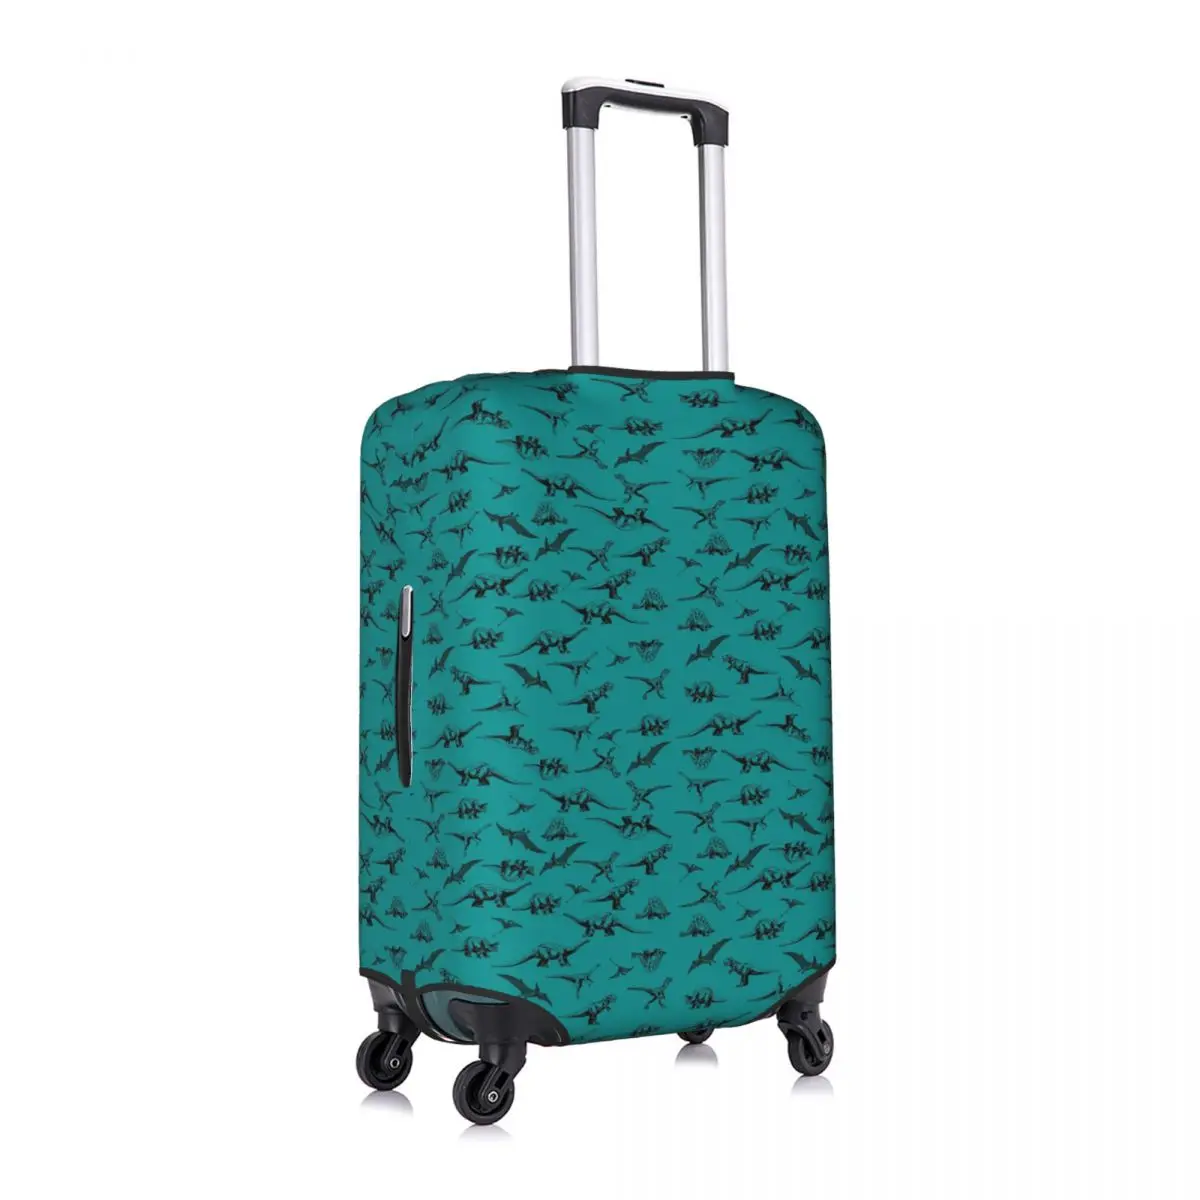 

Dinosaurs Luggage Cover Spandex Suitcase Protector Fits 19-21 Inch